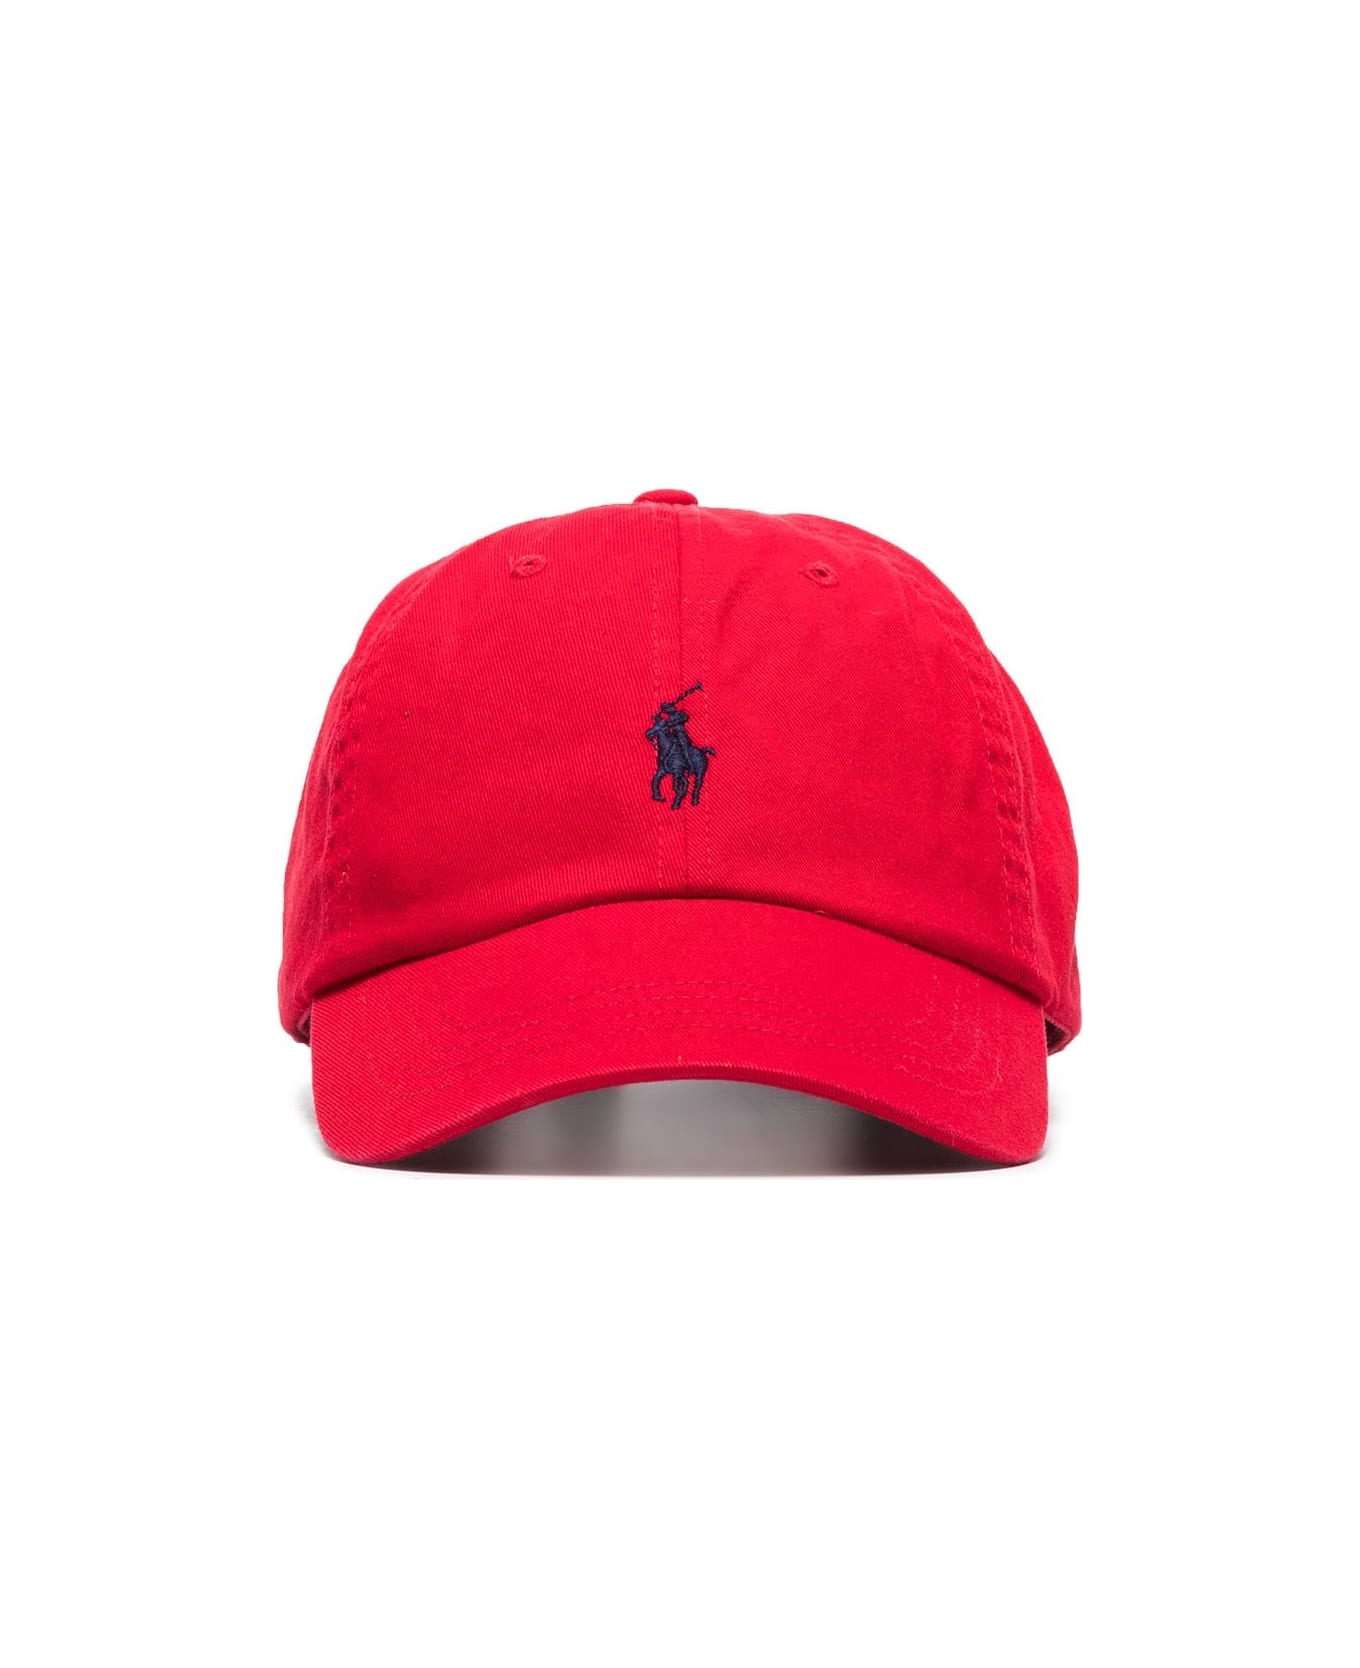 Ralph Lauren Red Baseball Hat With Blue Pony - Red